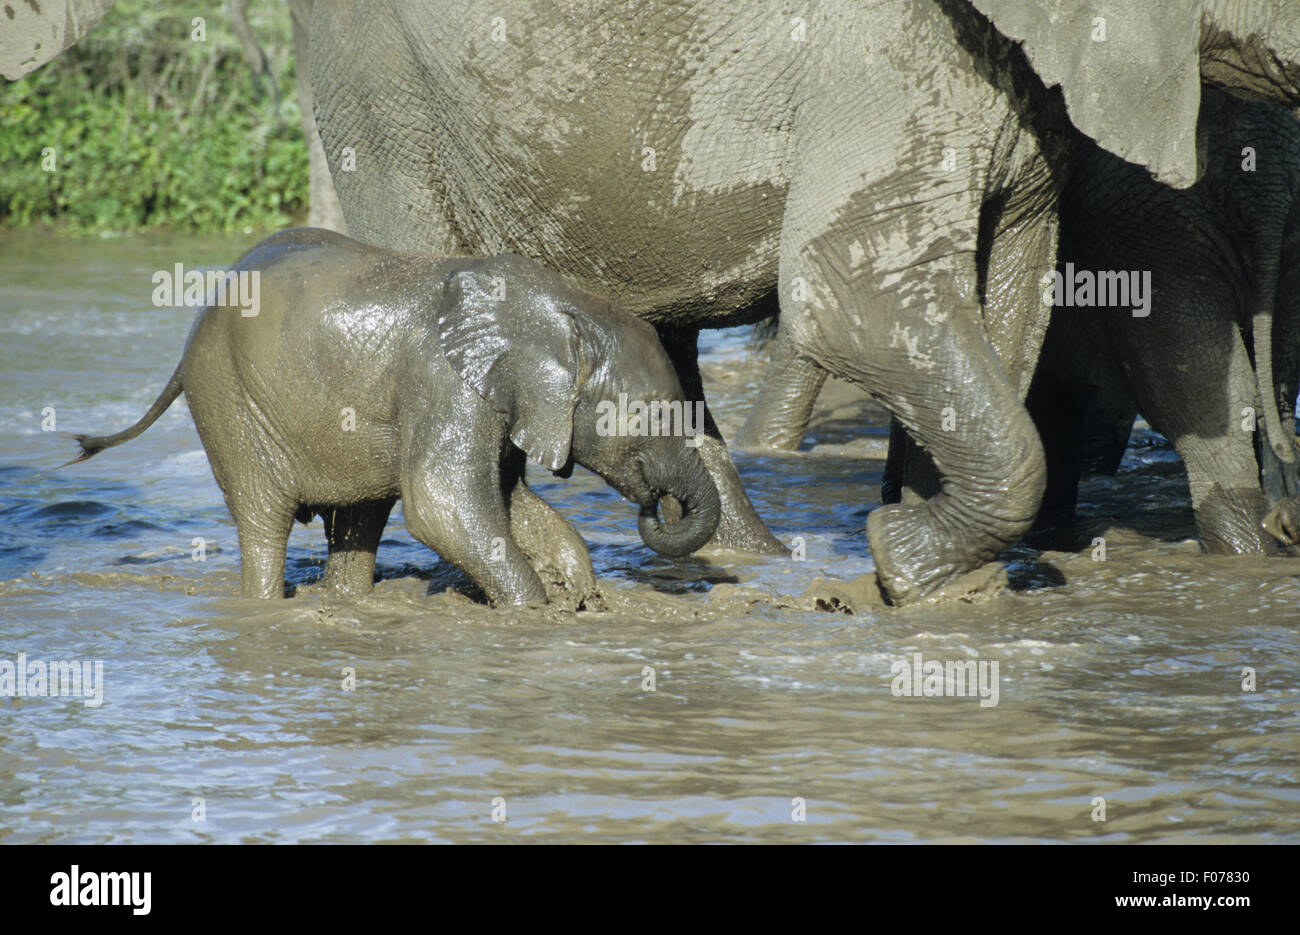 African Elephant small calf young taken in profile playing in river water by side of large elephant Stock Photo